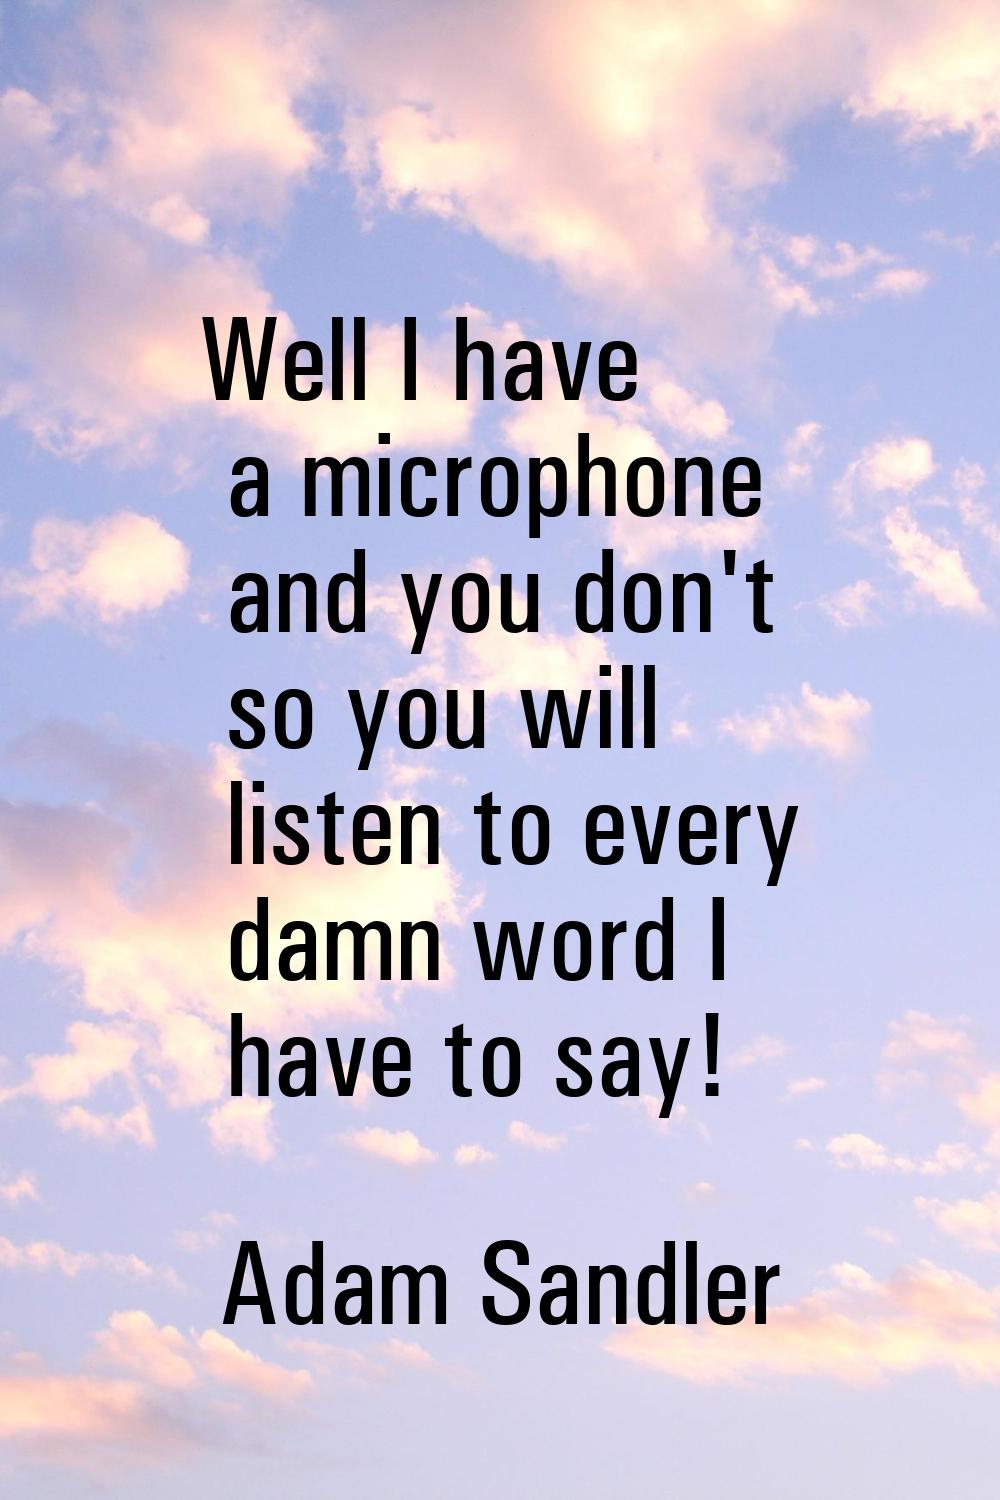 Well I have a microphone and you don't so you will listen to every damn word I have to say!